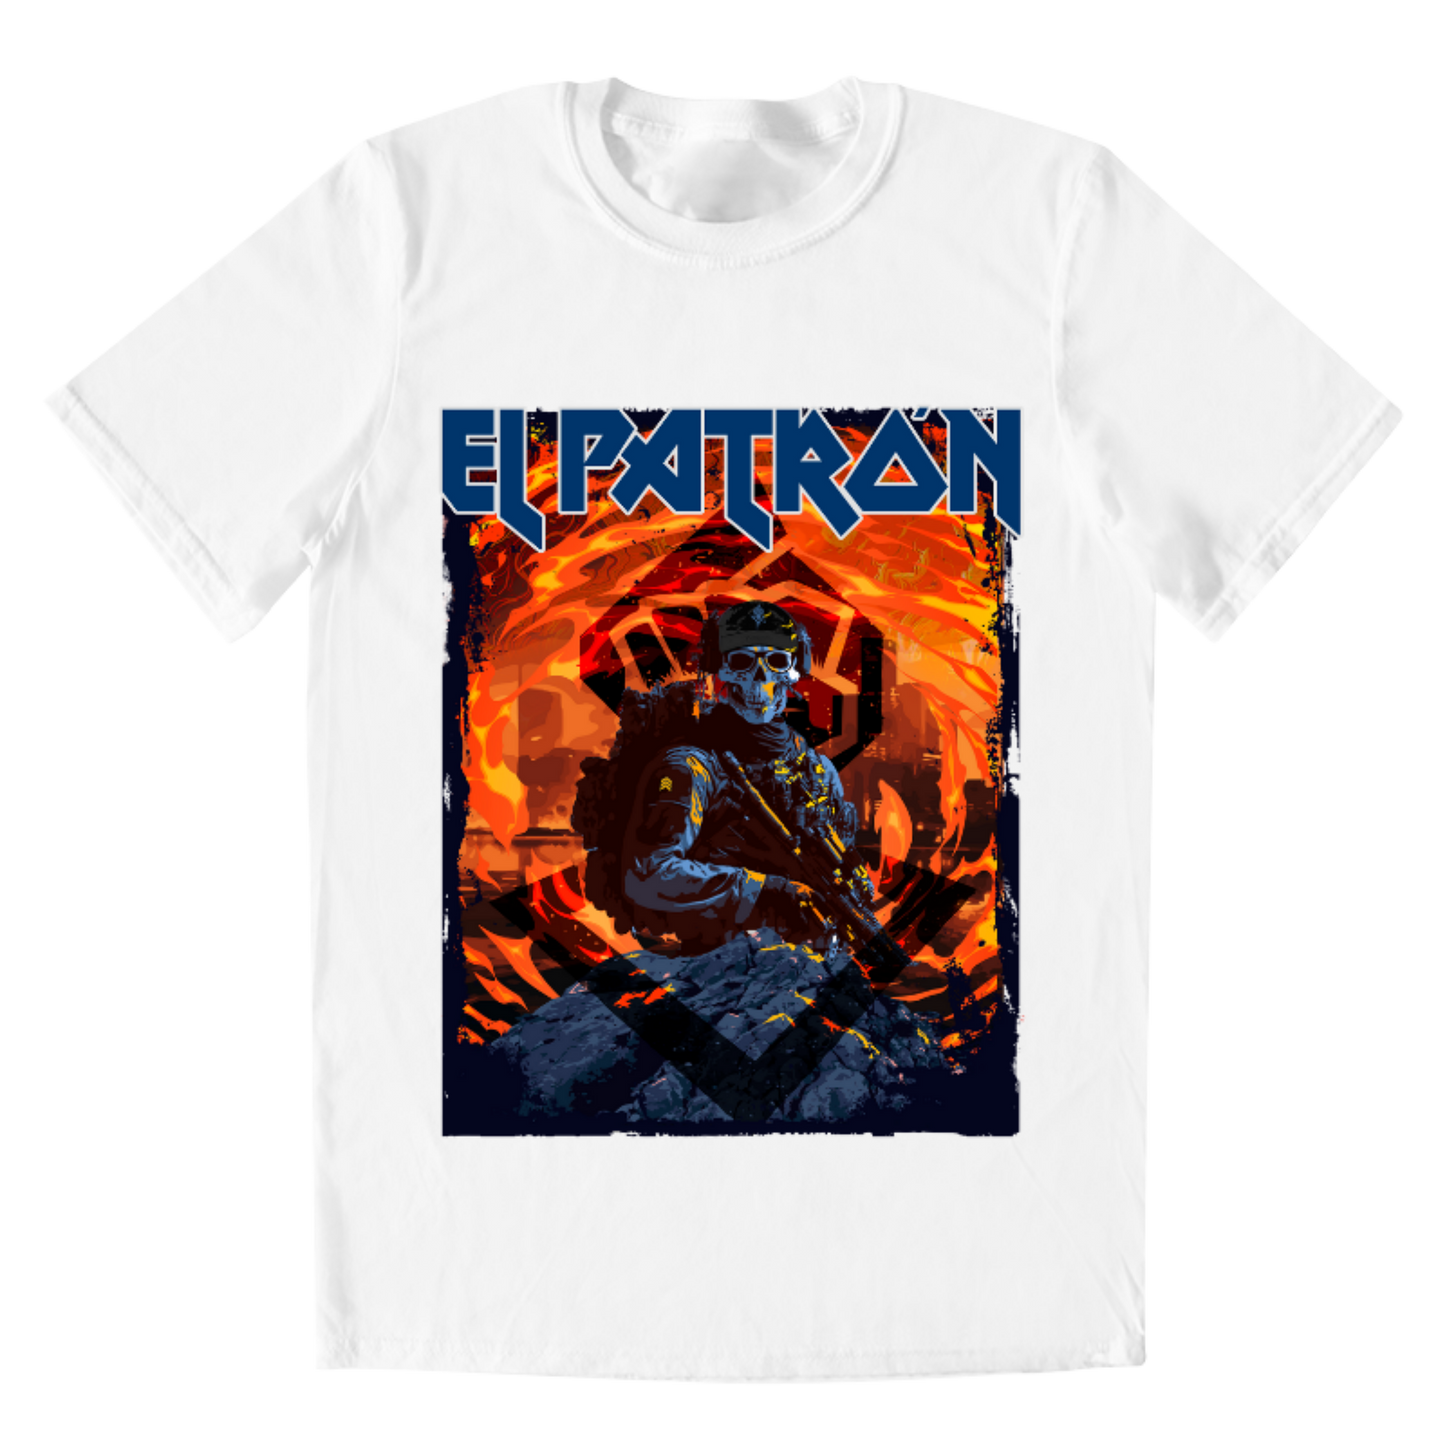 Alkapone men's t-shirt with the iron maiden pattern